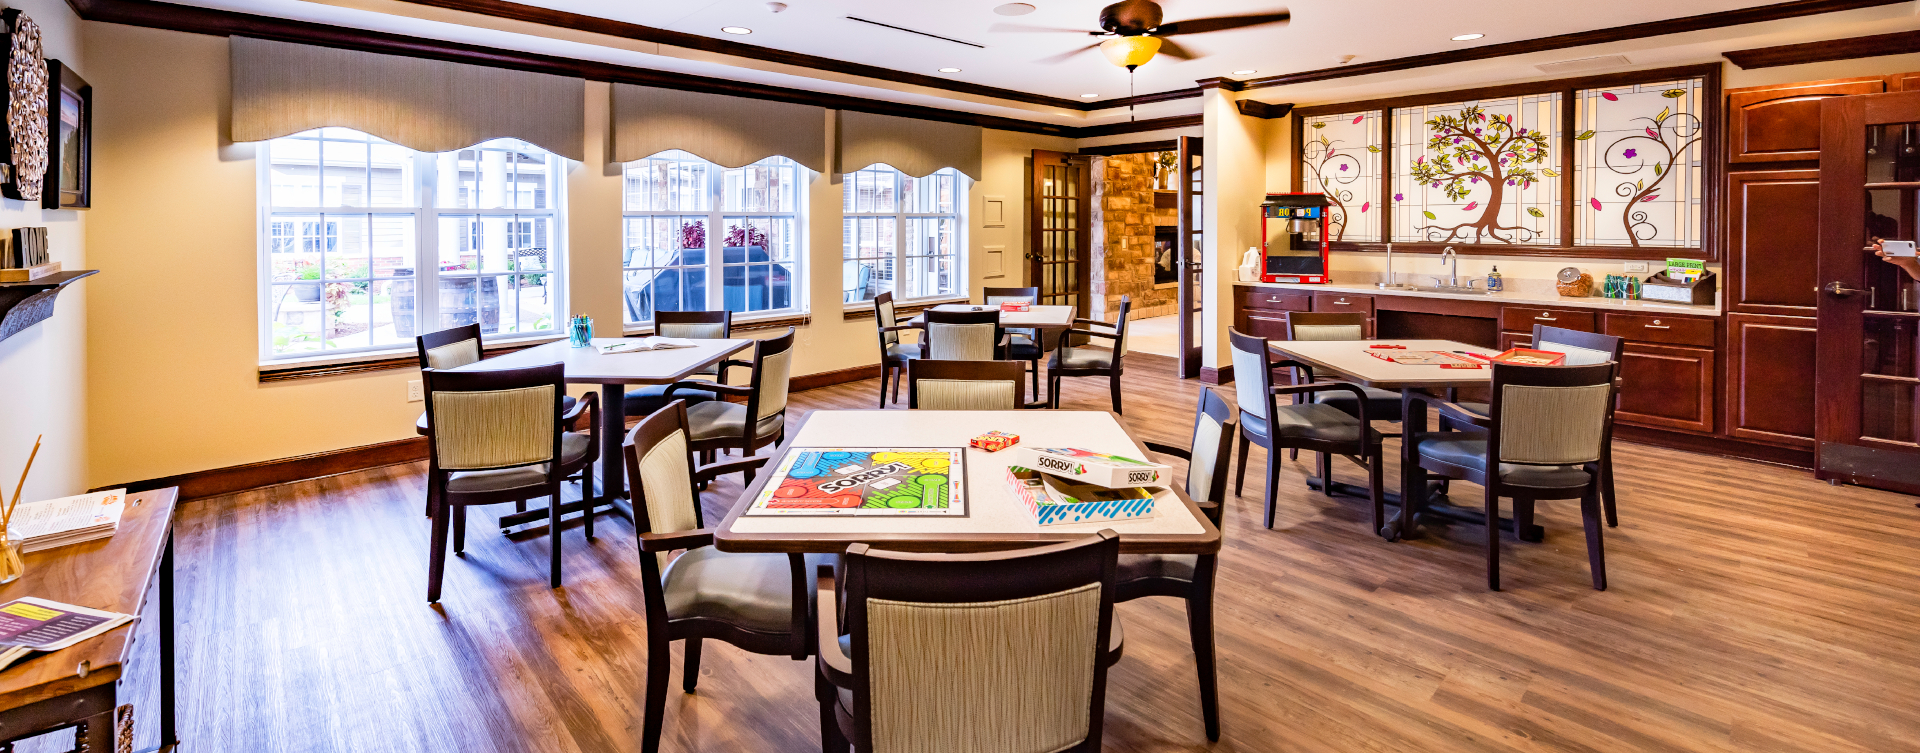 Unleash your creative side in the activity room at Bickford of Shelby Township